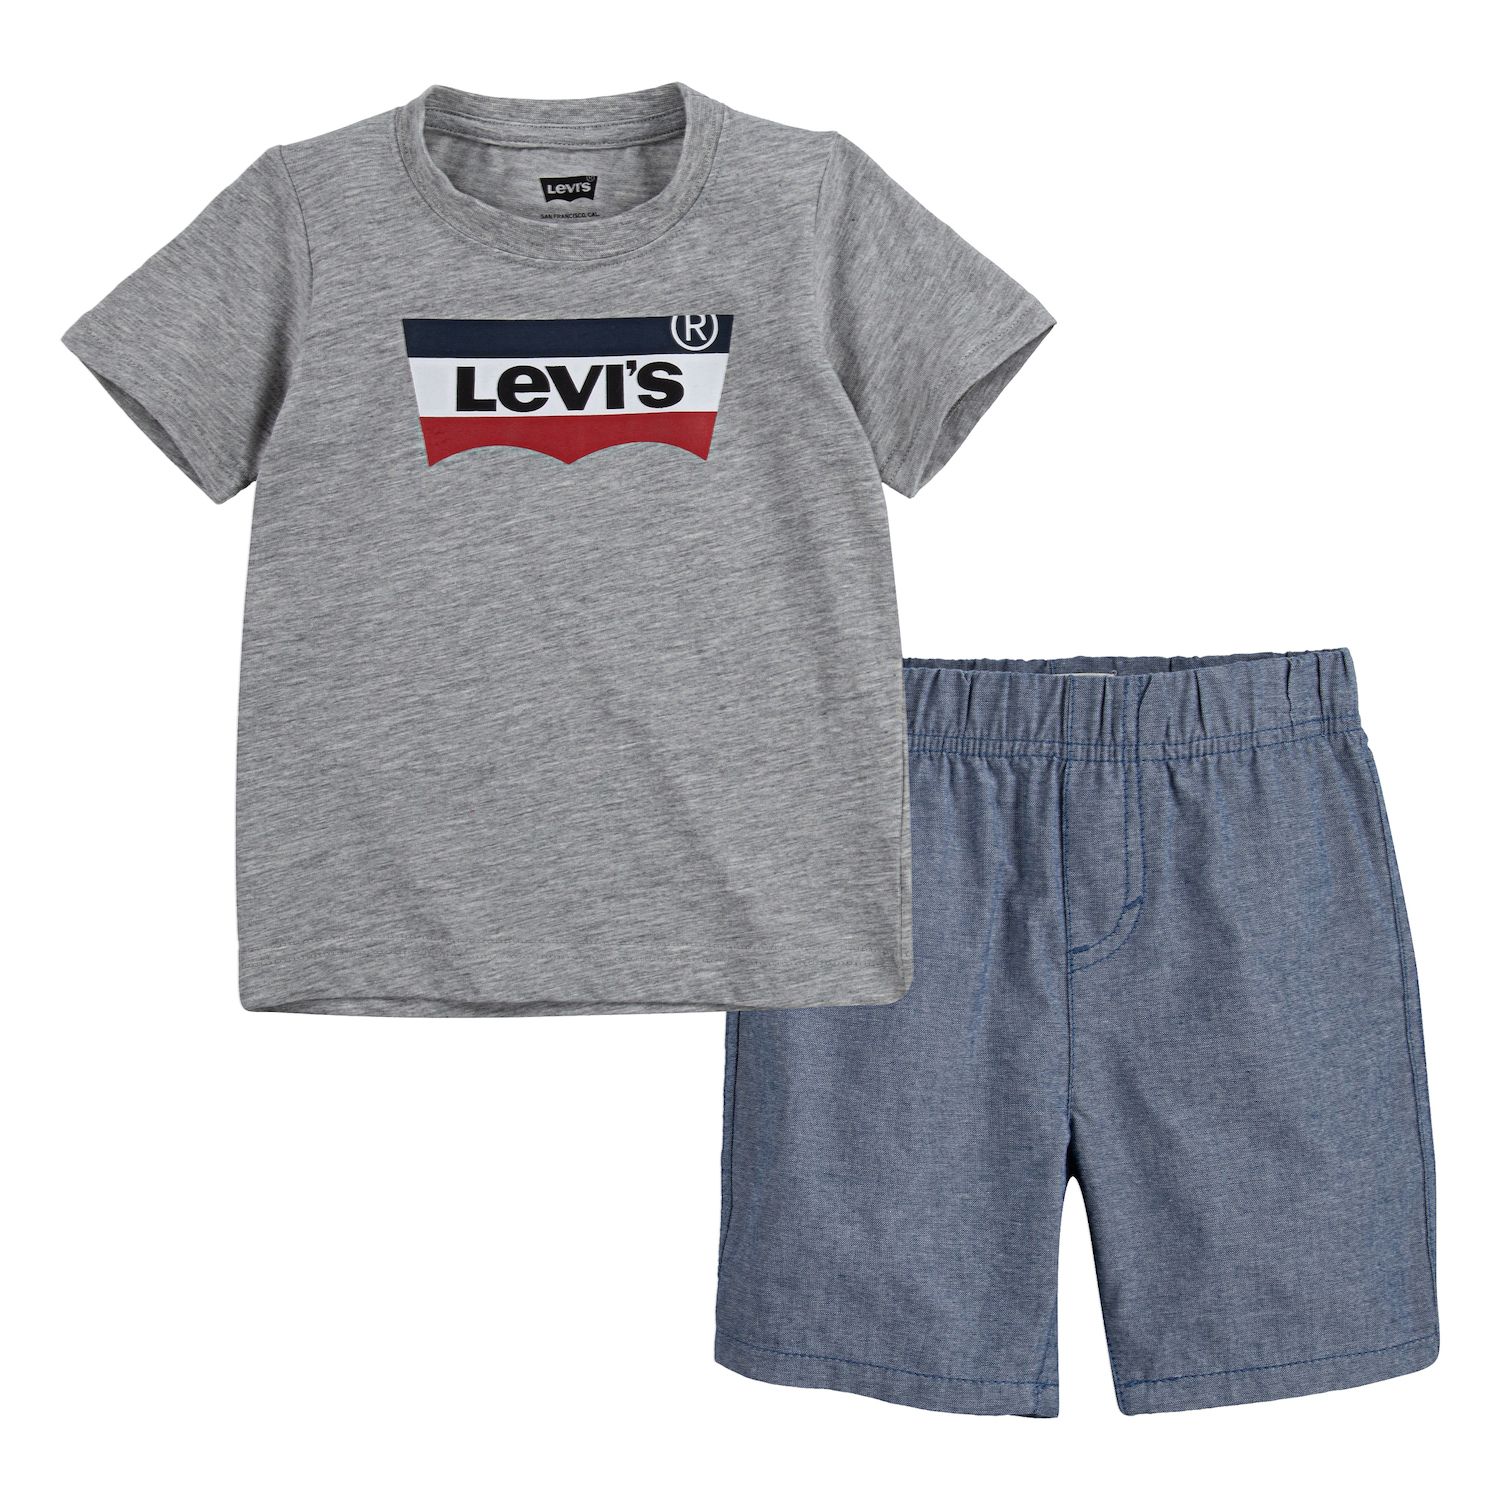 Image for Levi's Baby Boy Batwing Graphic Tee & Chambray Shorts Set at Kohl's.